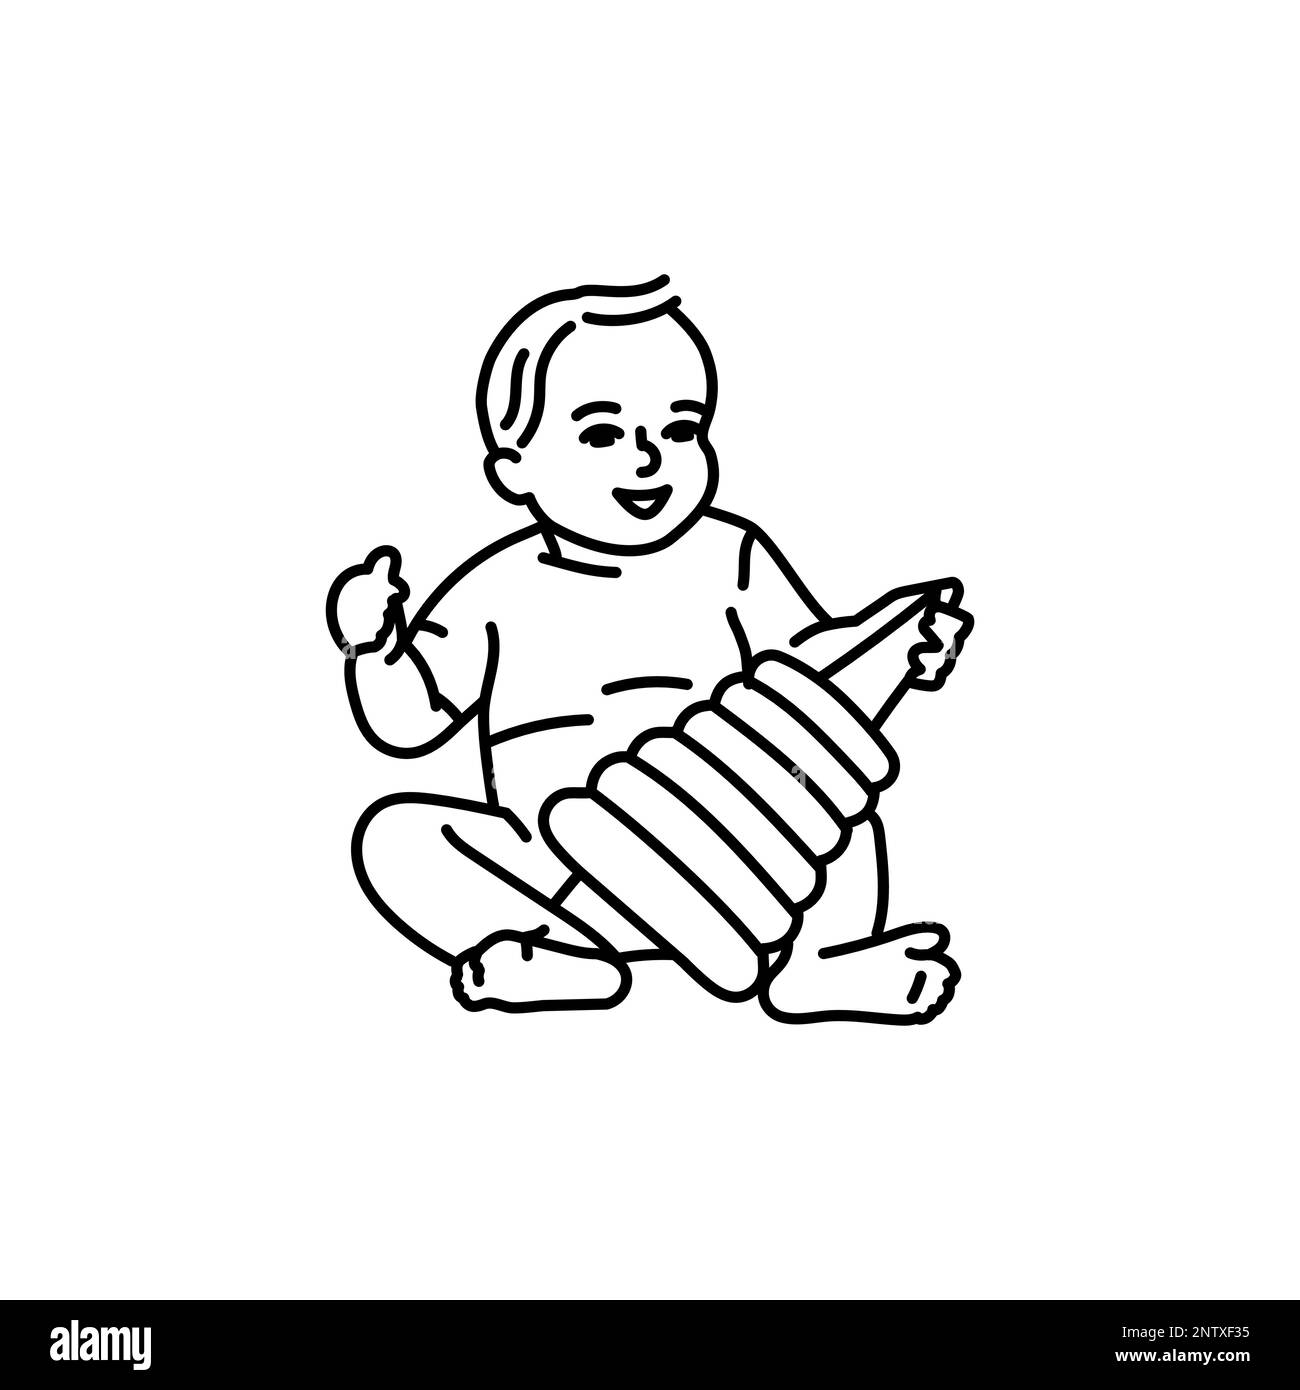 Drawing - Babies and toddlers - Educatall